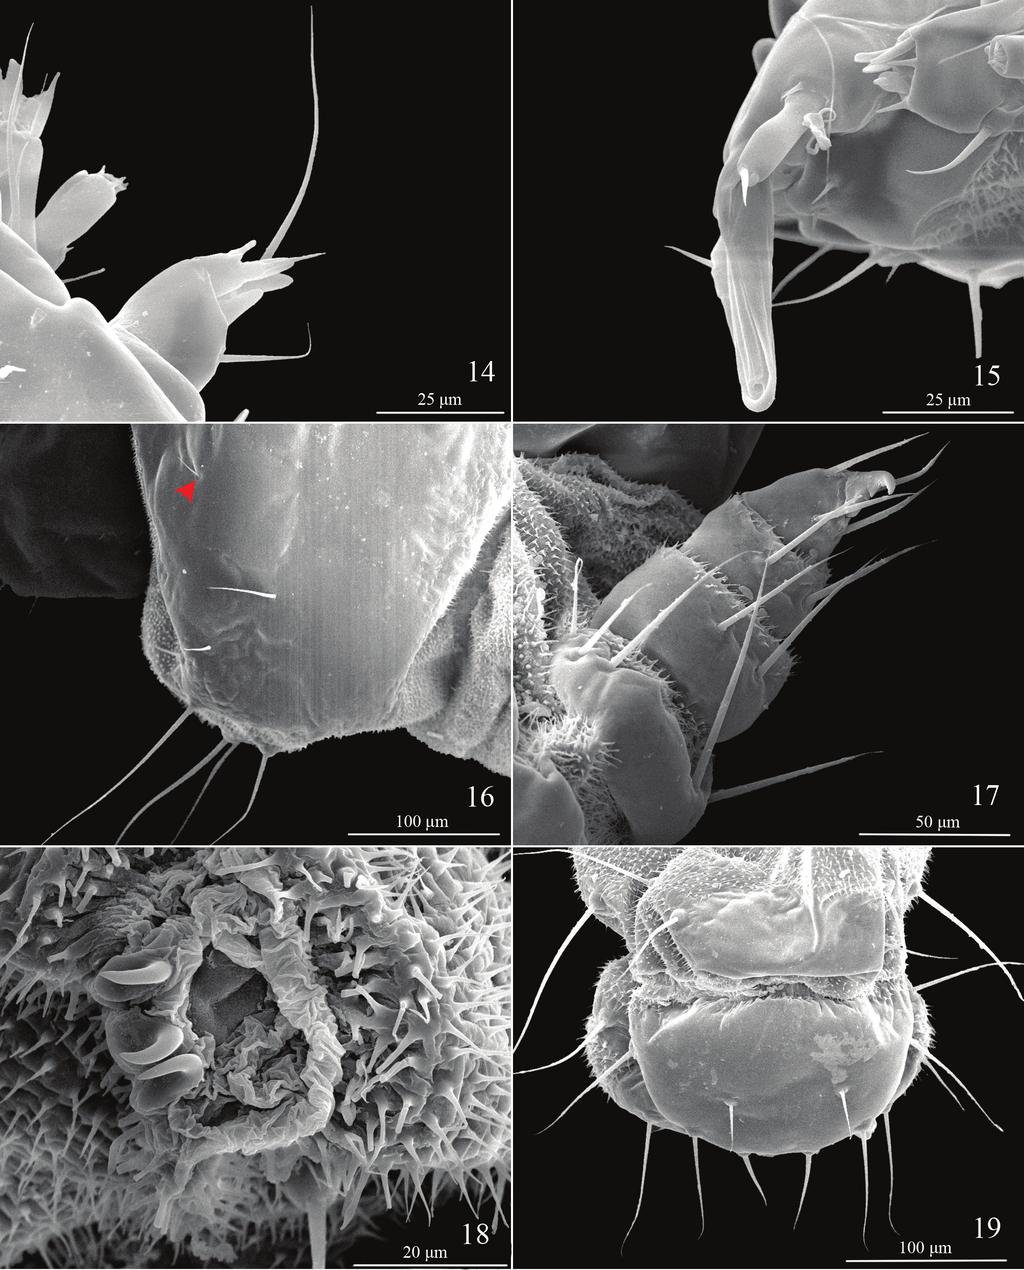 Description of Telamoptilia grewiae sp. n. and the consequences... 127 Figures 14 19. Last instar larval characters of Telamoptilia grewiae sp. n. 14 Antenna 15 Mouthpart 16 Setae on prothorax shield, arrow indicating the positon of XD1 17 Thoracic leg 18 Proleg 19 A9 10, dorsal view.